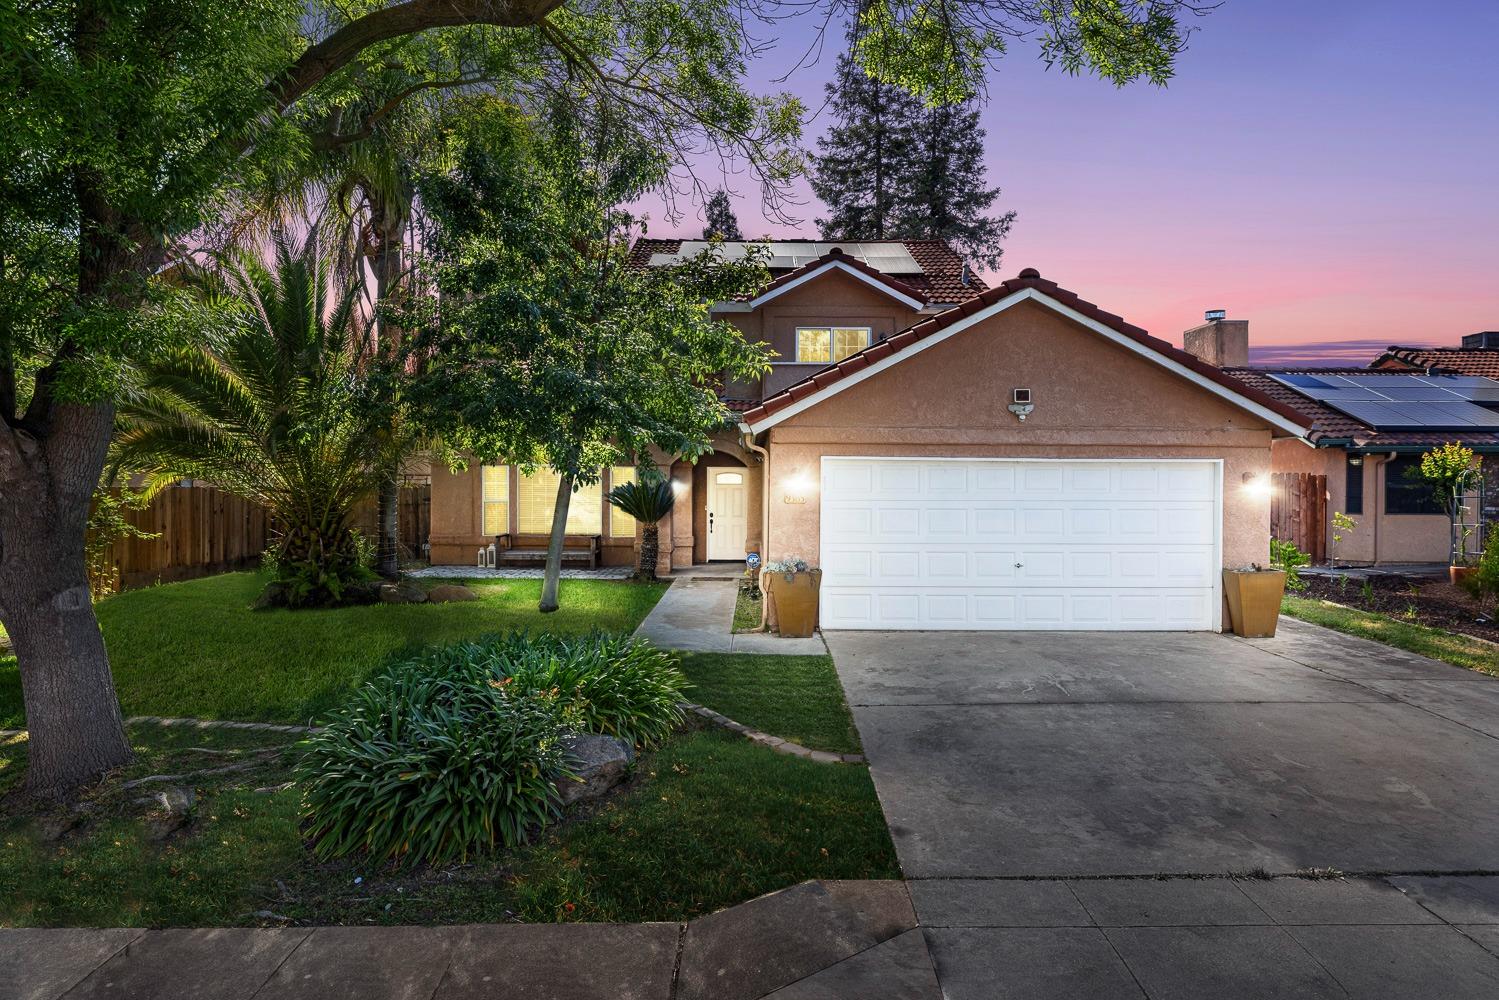 Photo of 9365 N Archie Ave in Fresno, CA